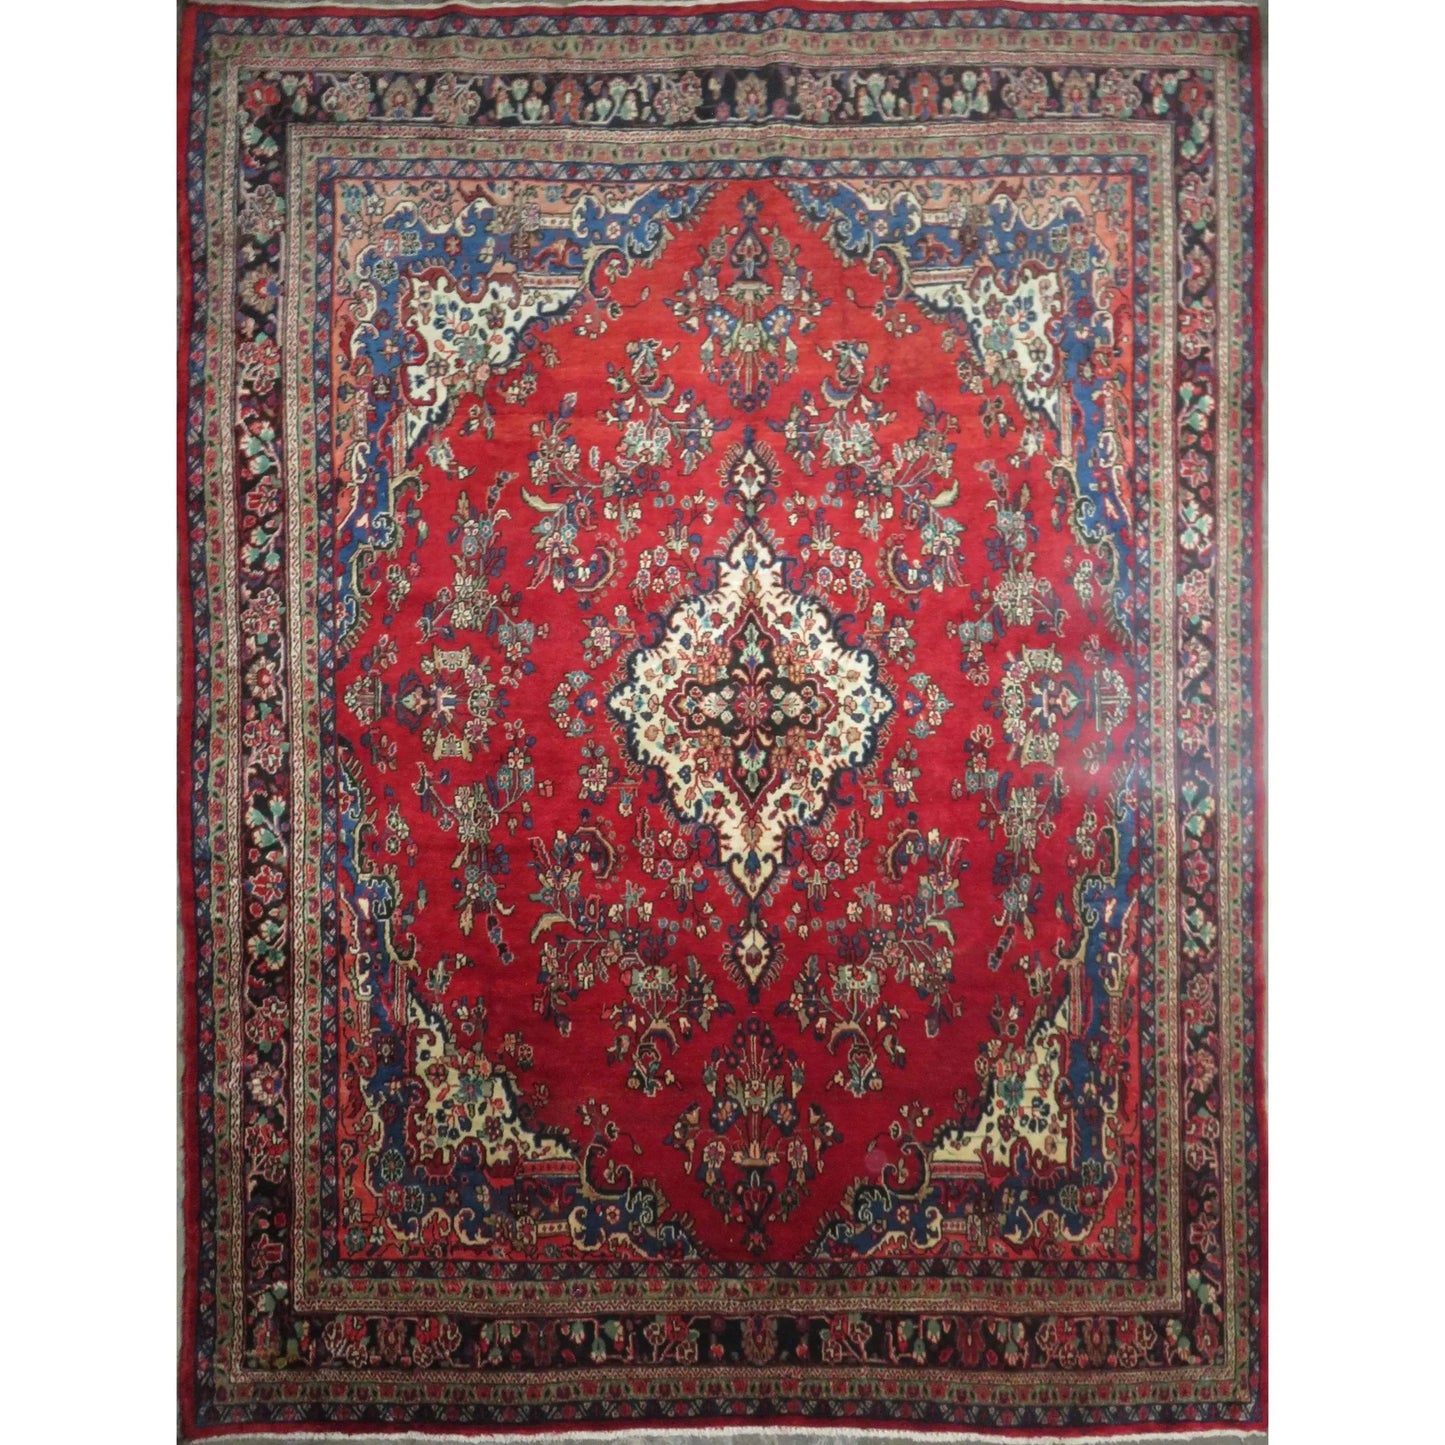 Hand-Knotted Persian Wool Rug _ Luxurious Vintage Design, 13'3" x 10'5", Artisan Crafted